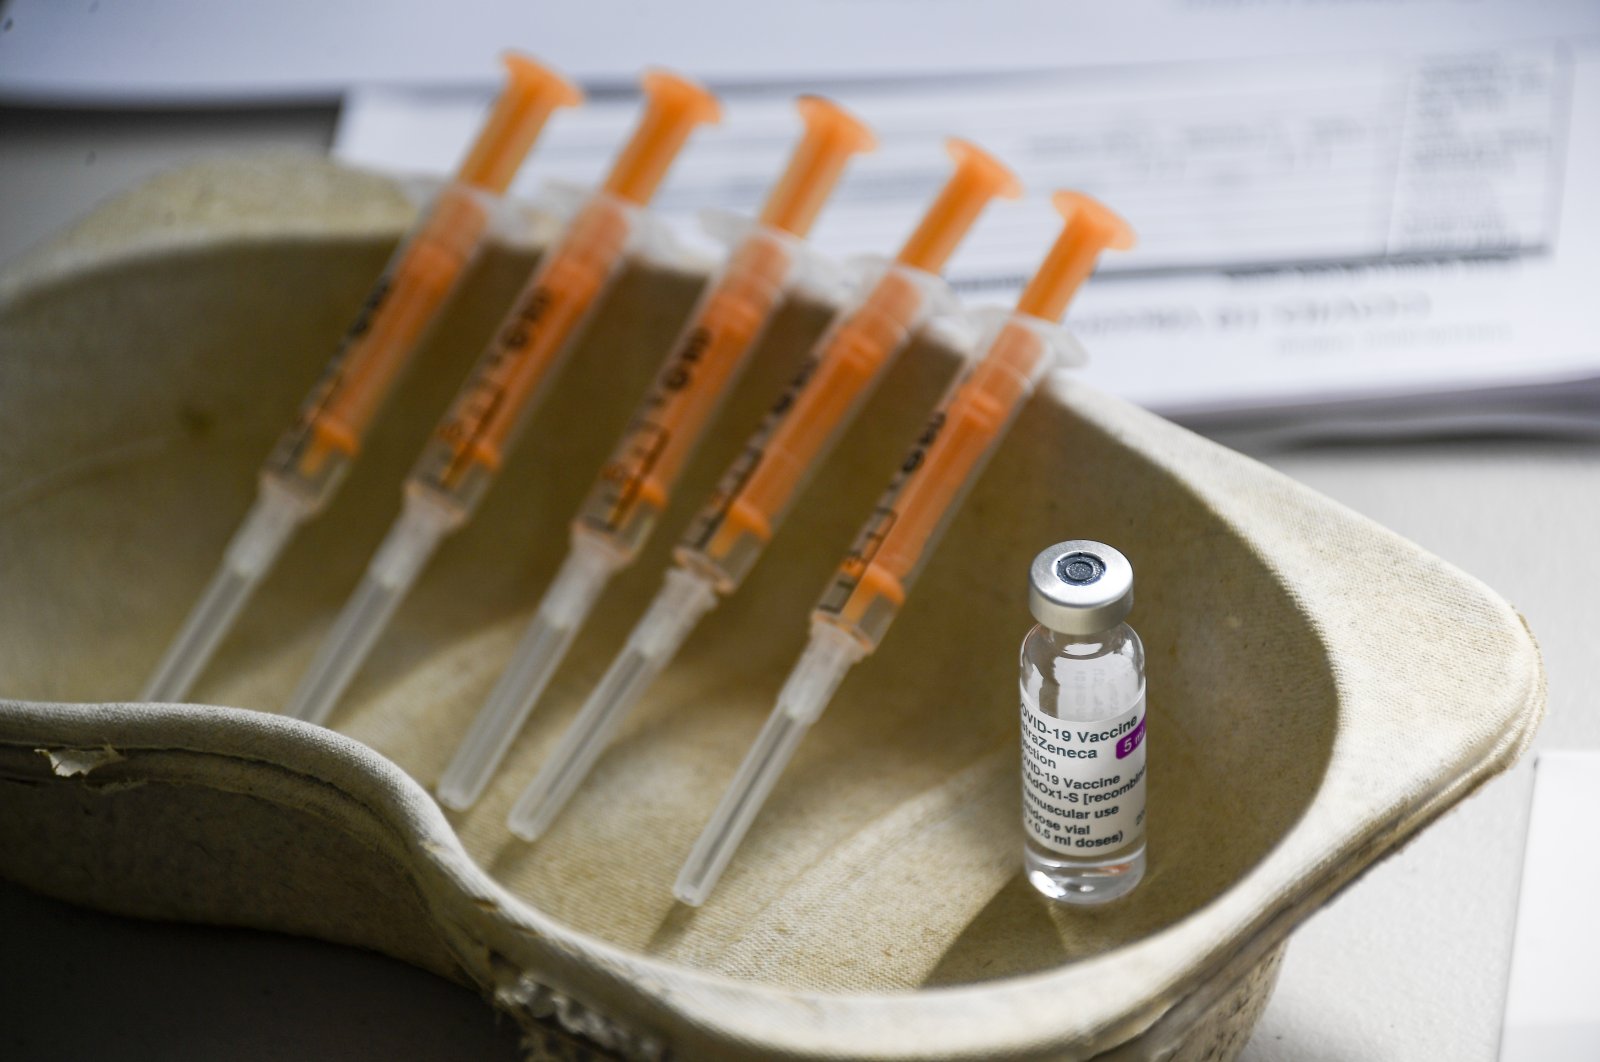 A vial and syringes of the AstraZeneca COVID-19 vaccine can be seen at the Guru Nanak Gurdwara Sikh temple, in Luton, U.K., March 21, 2021. (AP Photo)